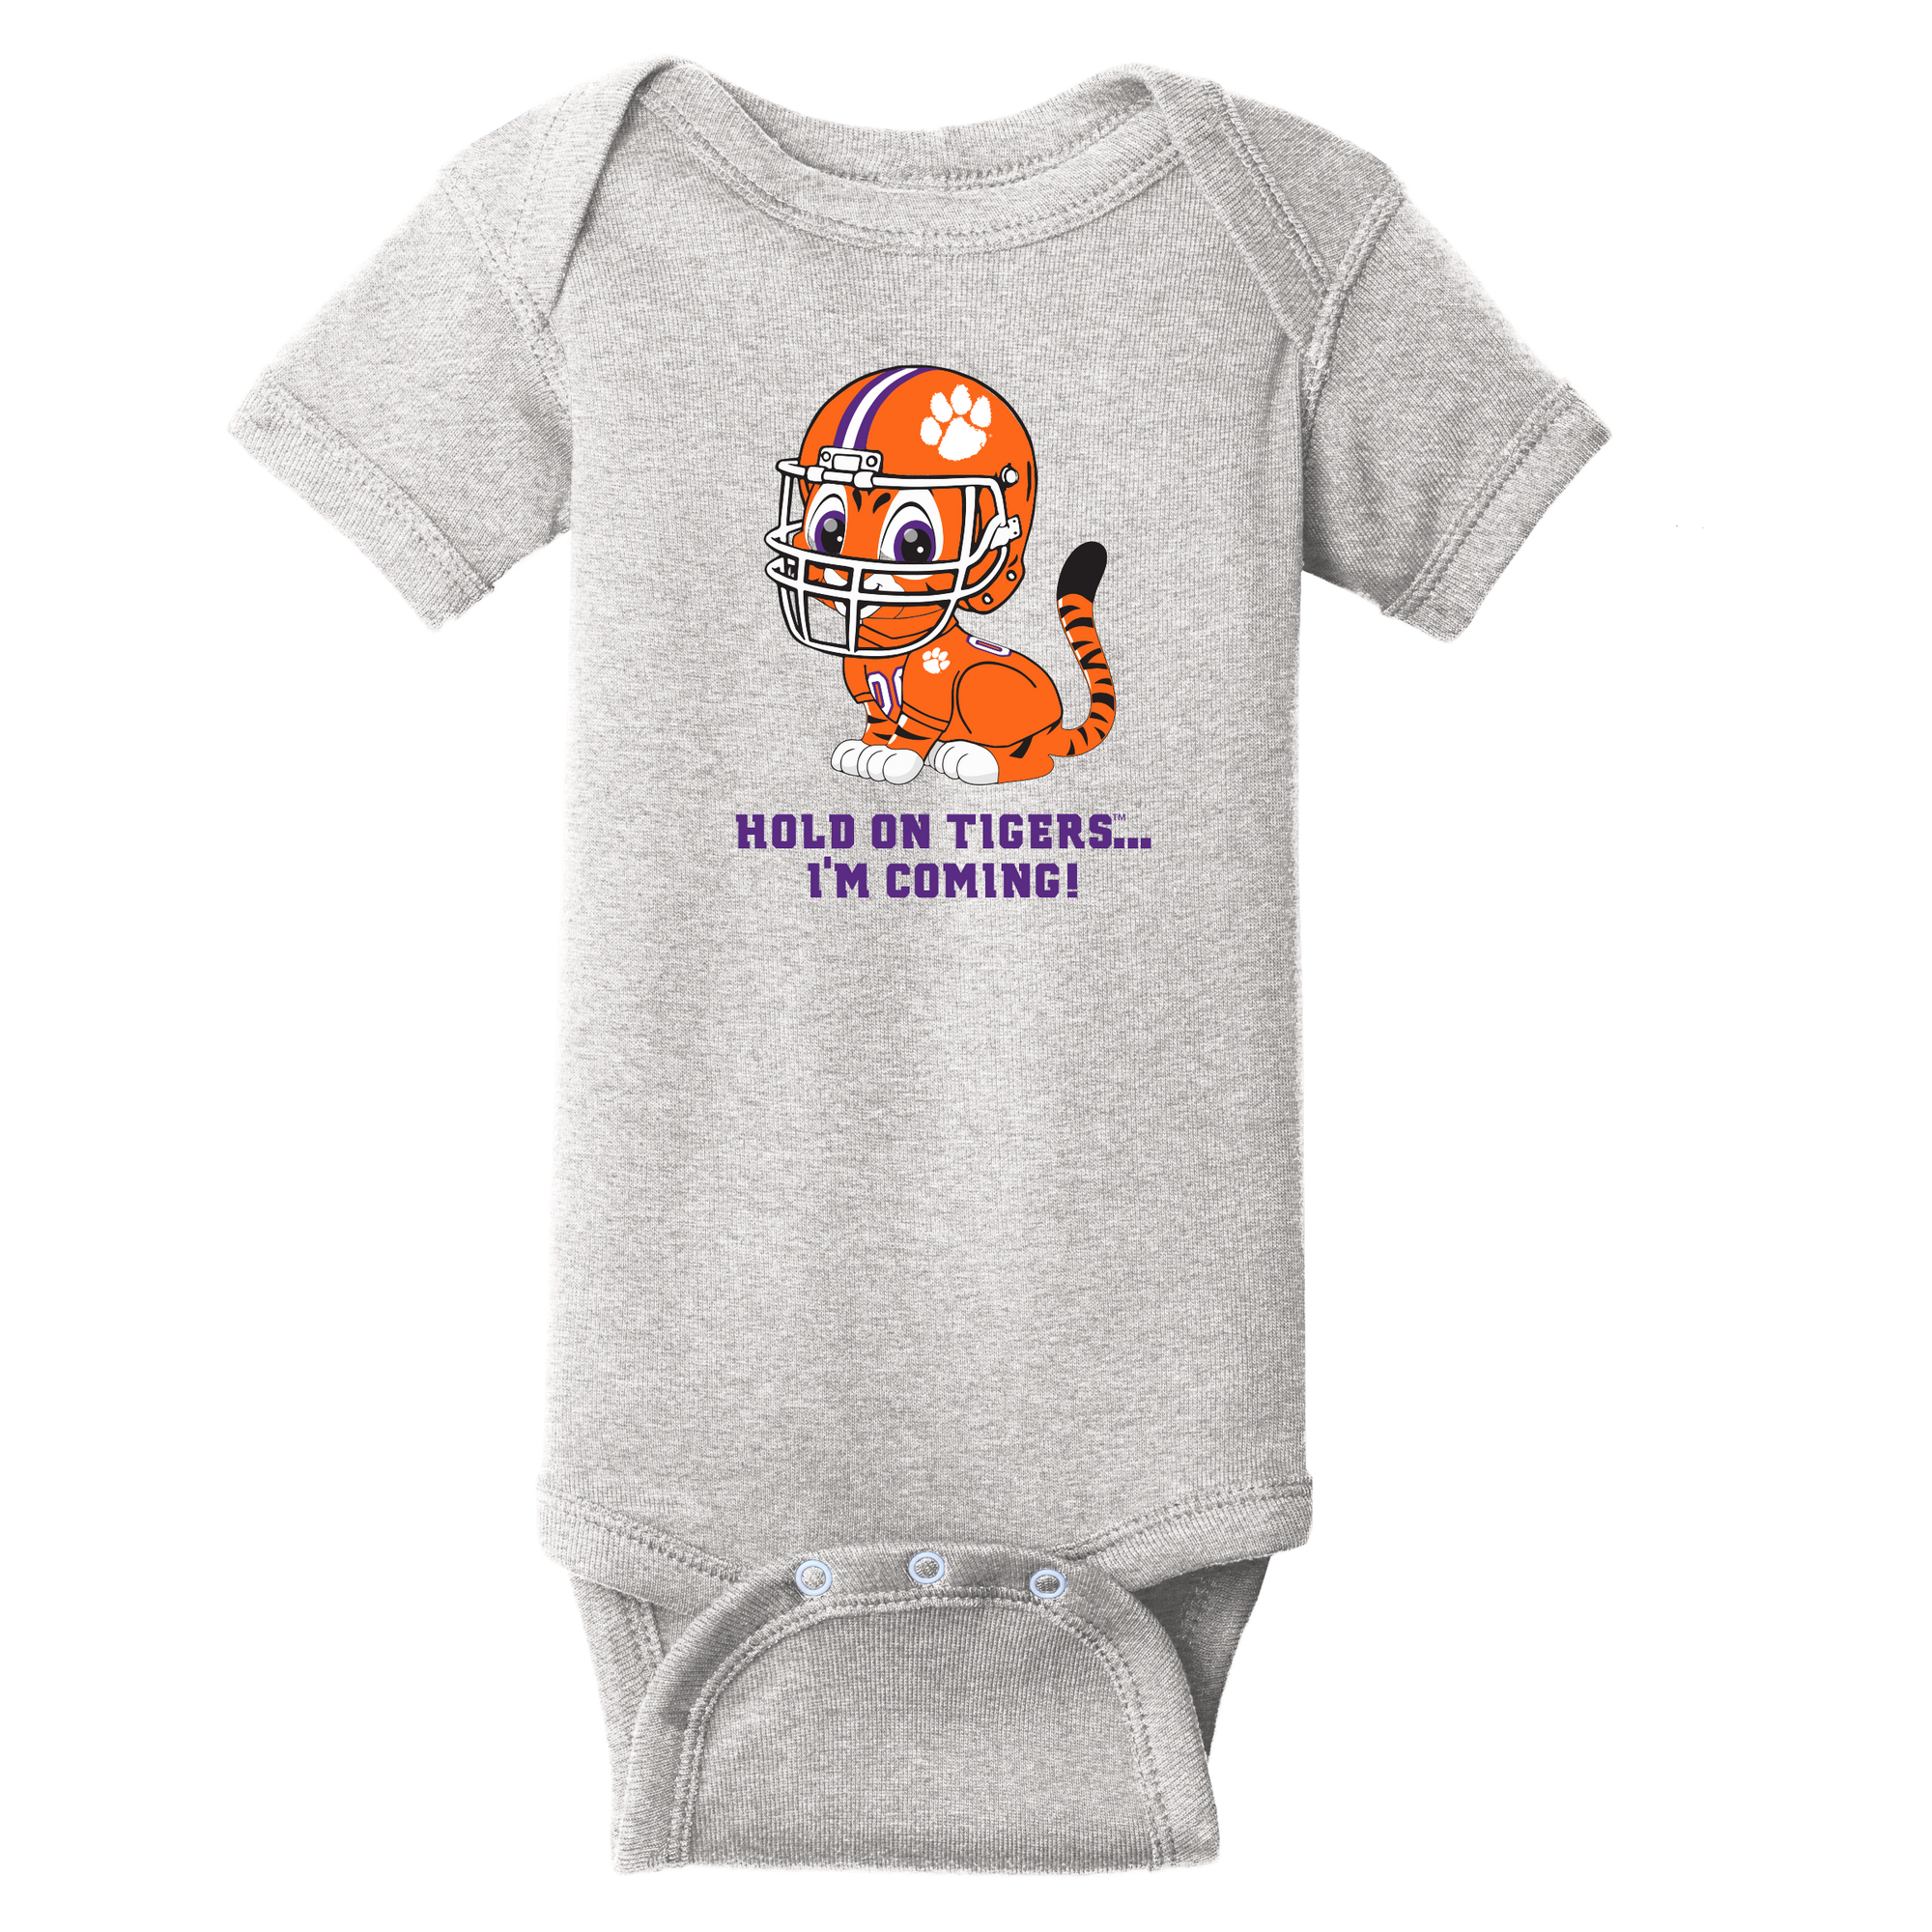 infant tigers jersey